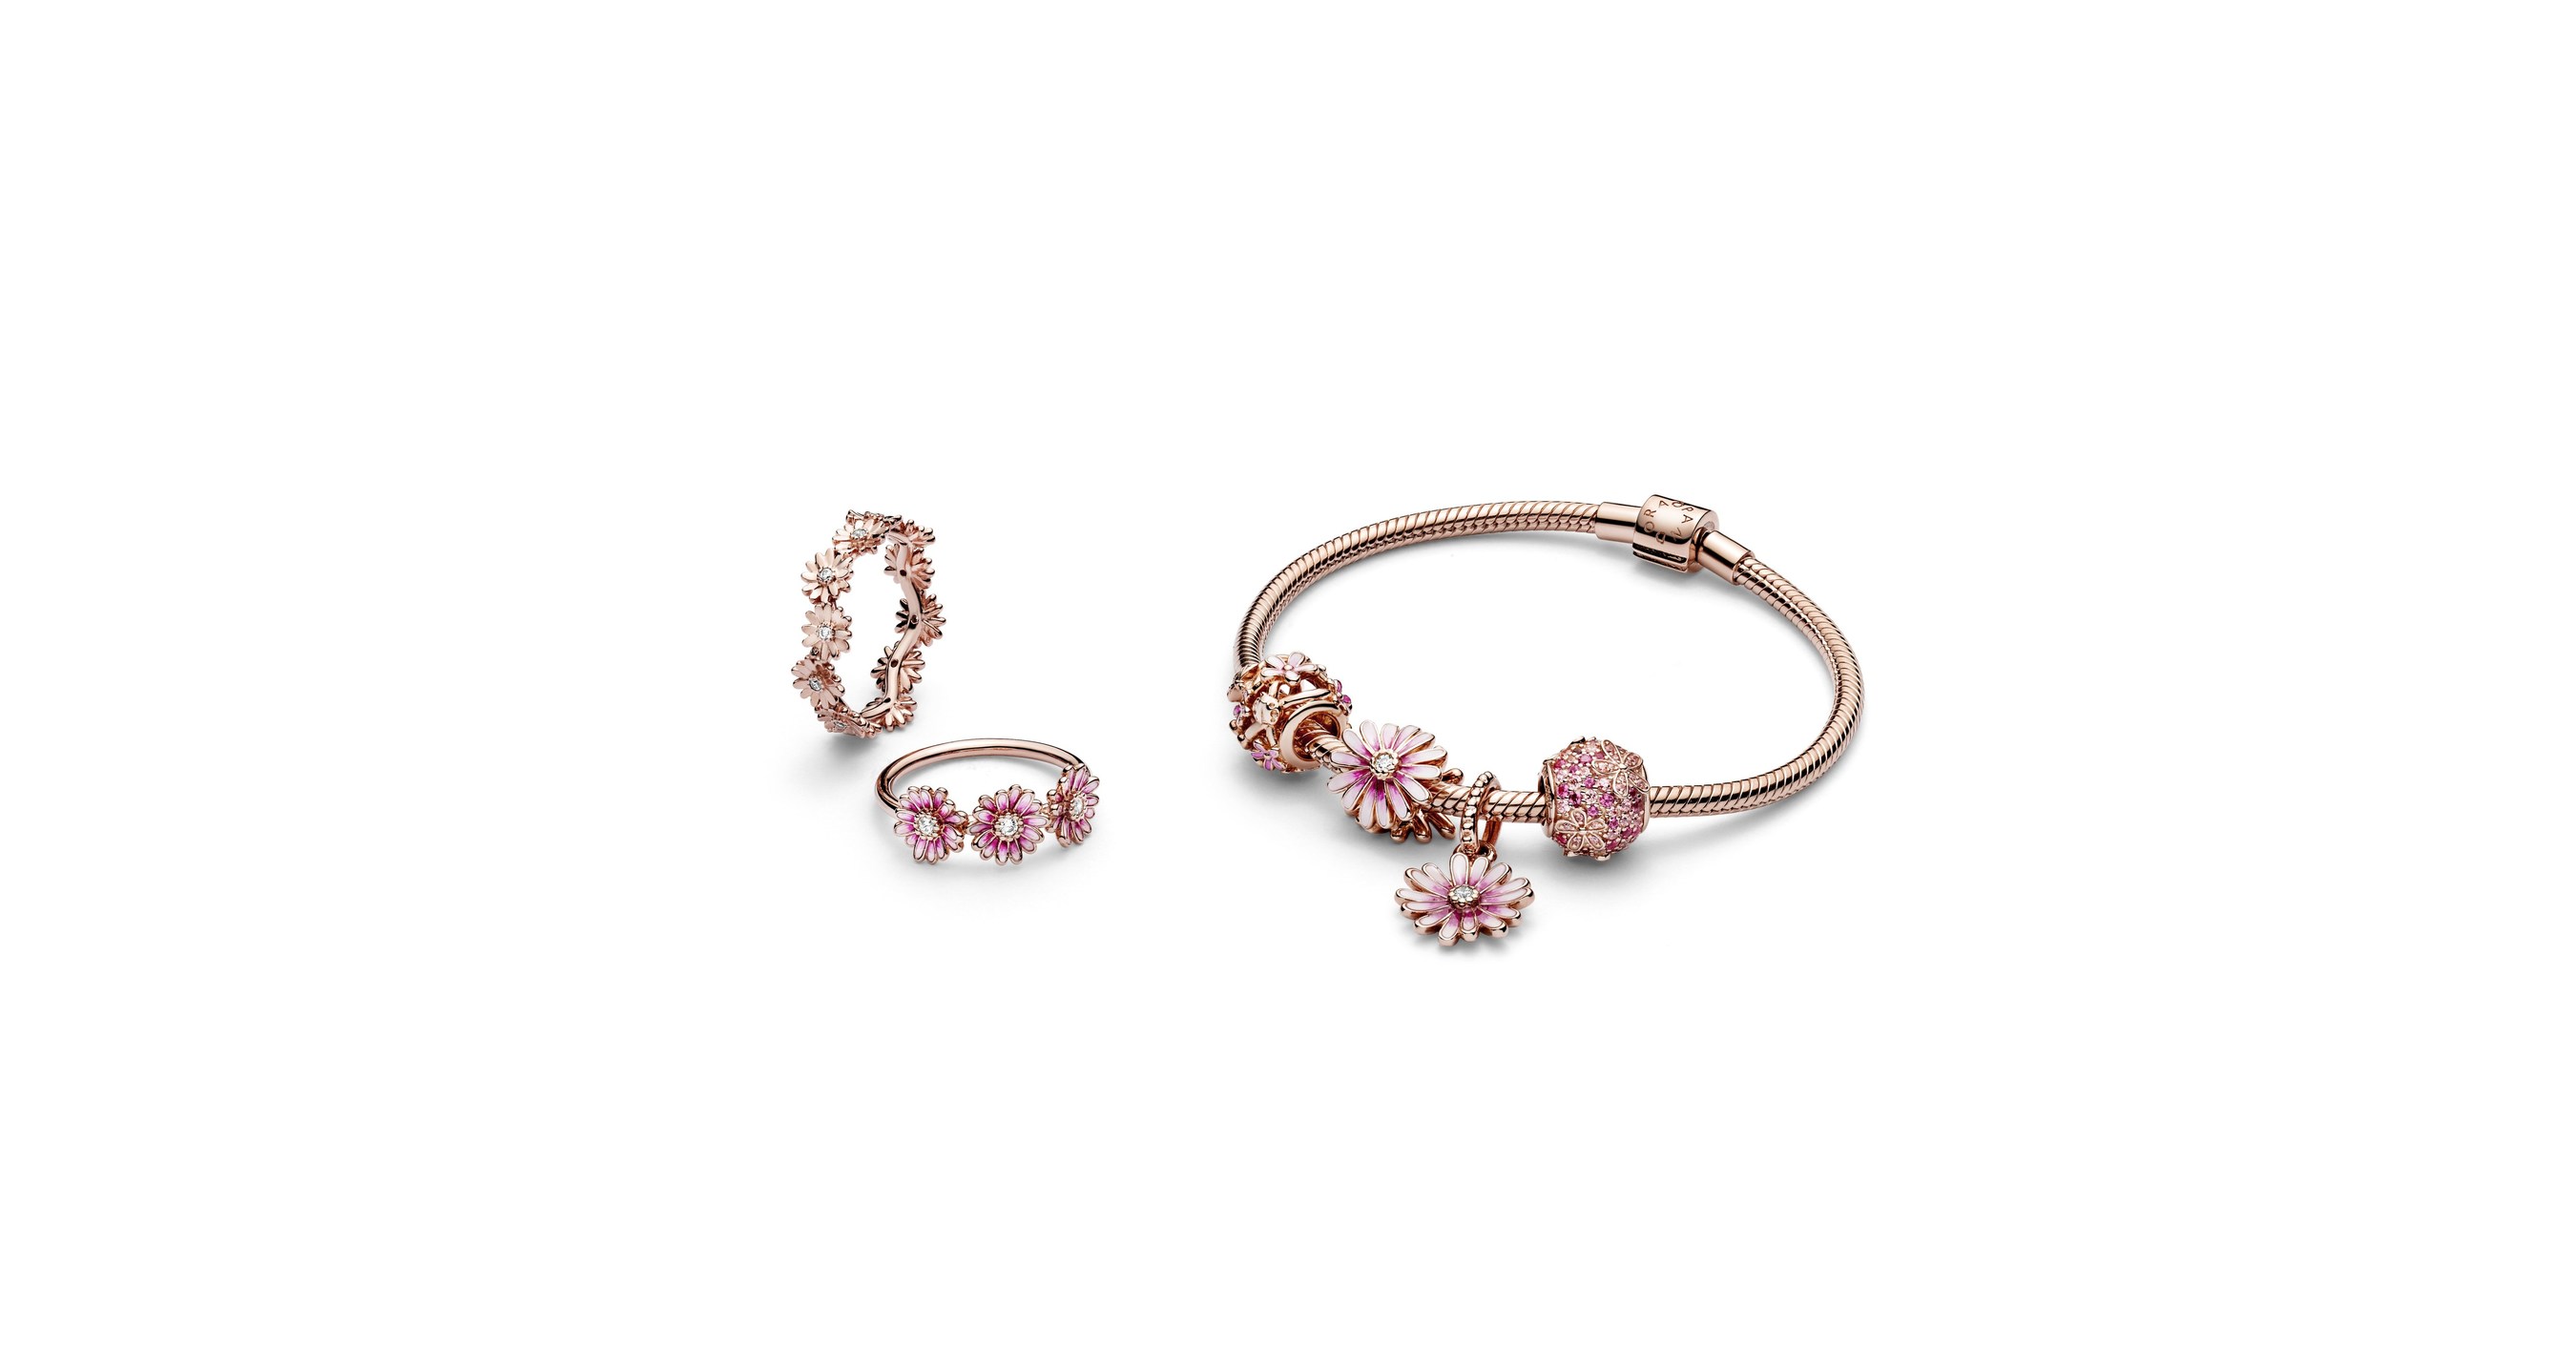 Petal Power: Pandora's love of nature continues to grow this season Pandora Garden, a new collection of nature-inspired designs that welcome the back into our lives